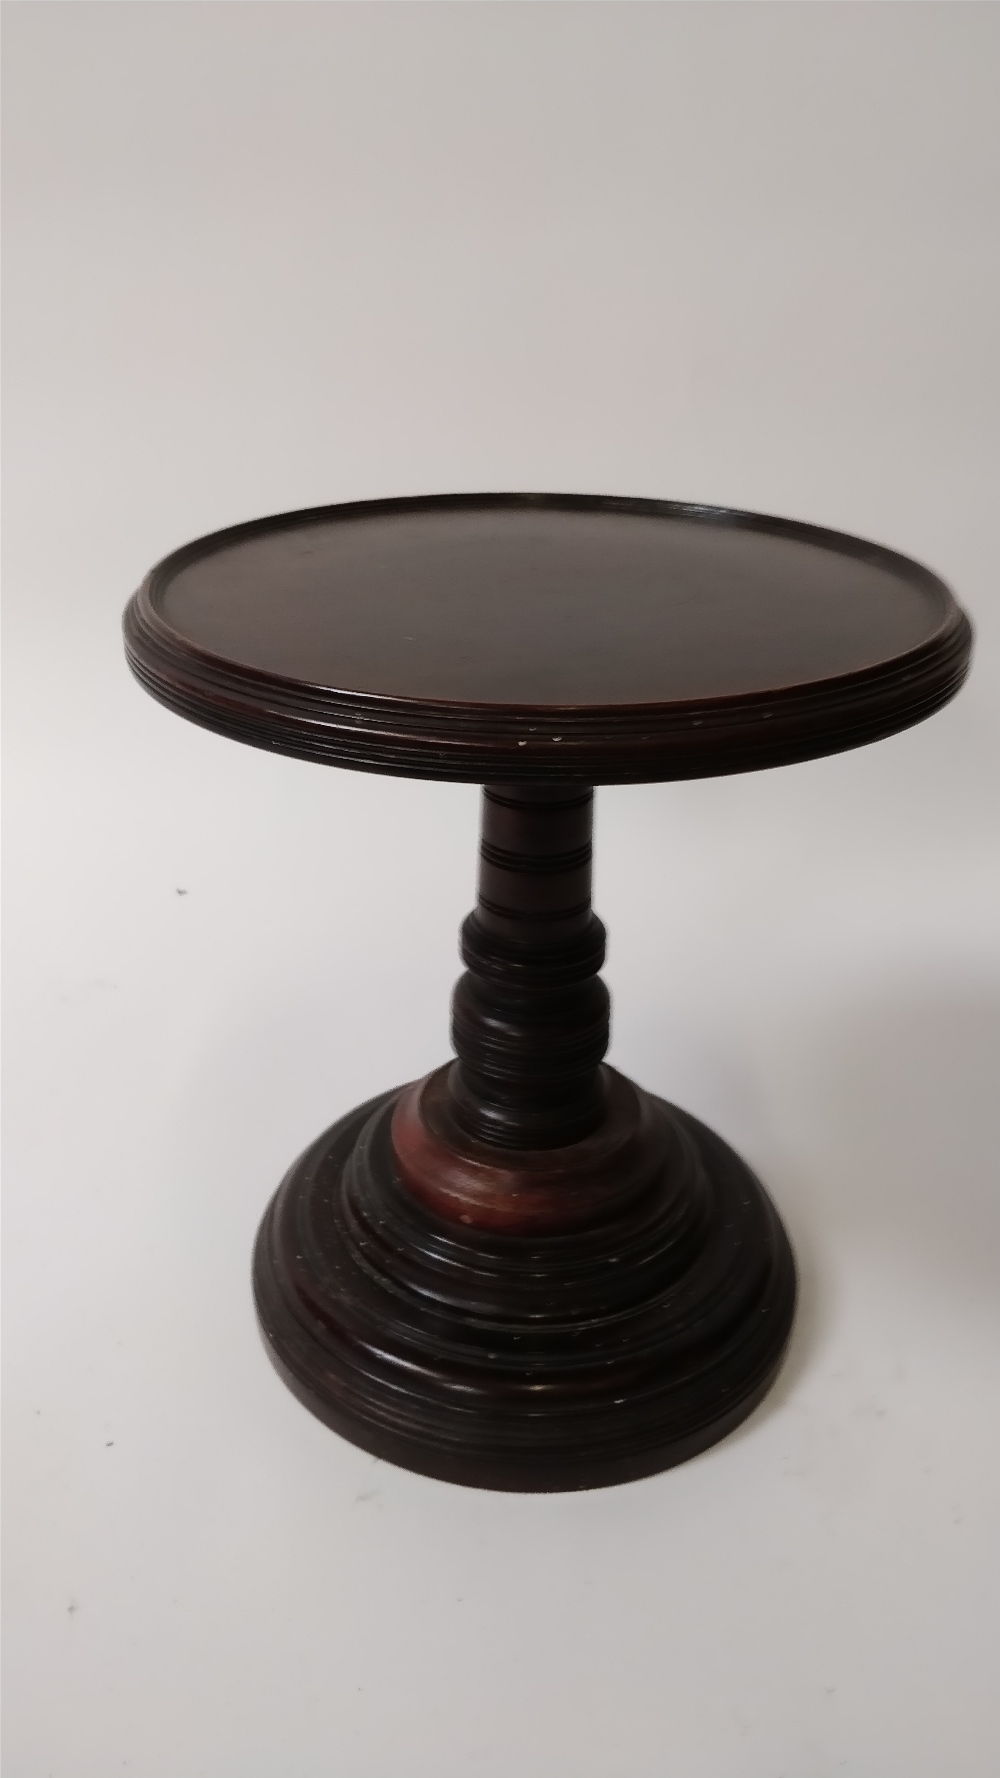 A Victorian mahogany adjustable table stand, with a turned stem and base, 32cm high - Image 2 of 2